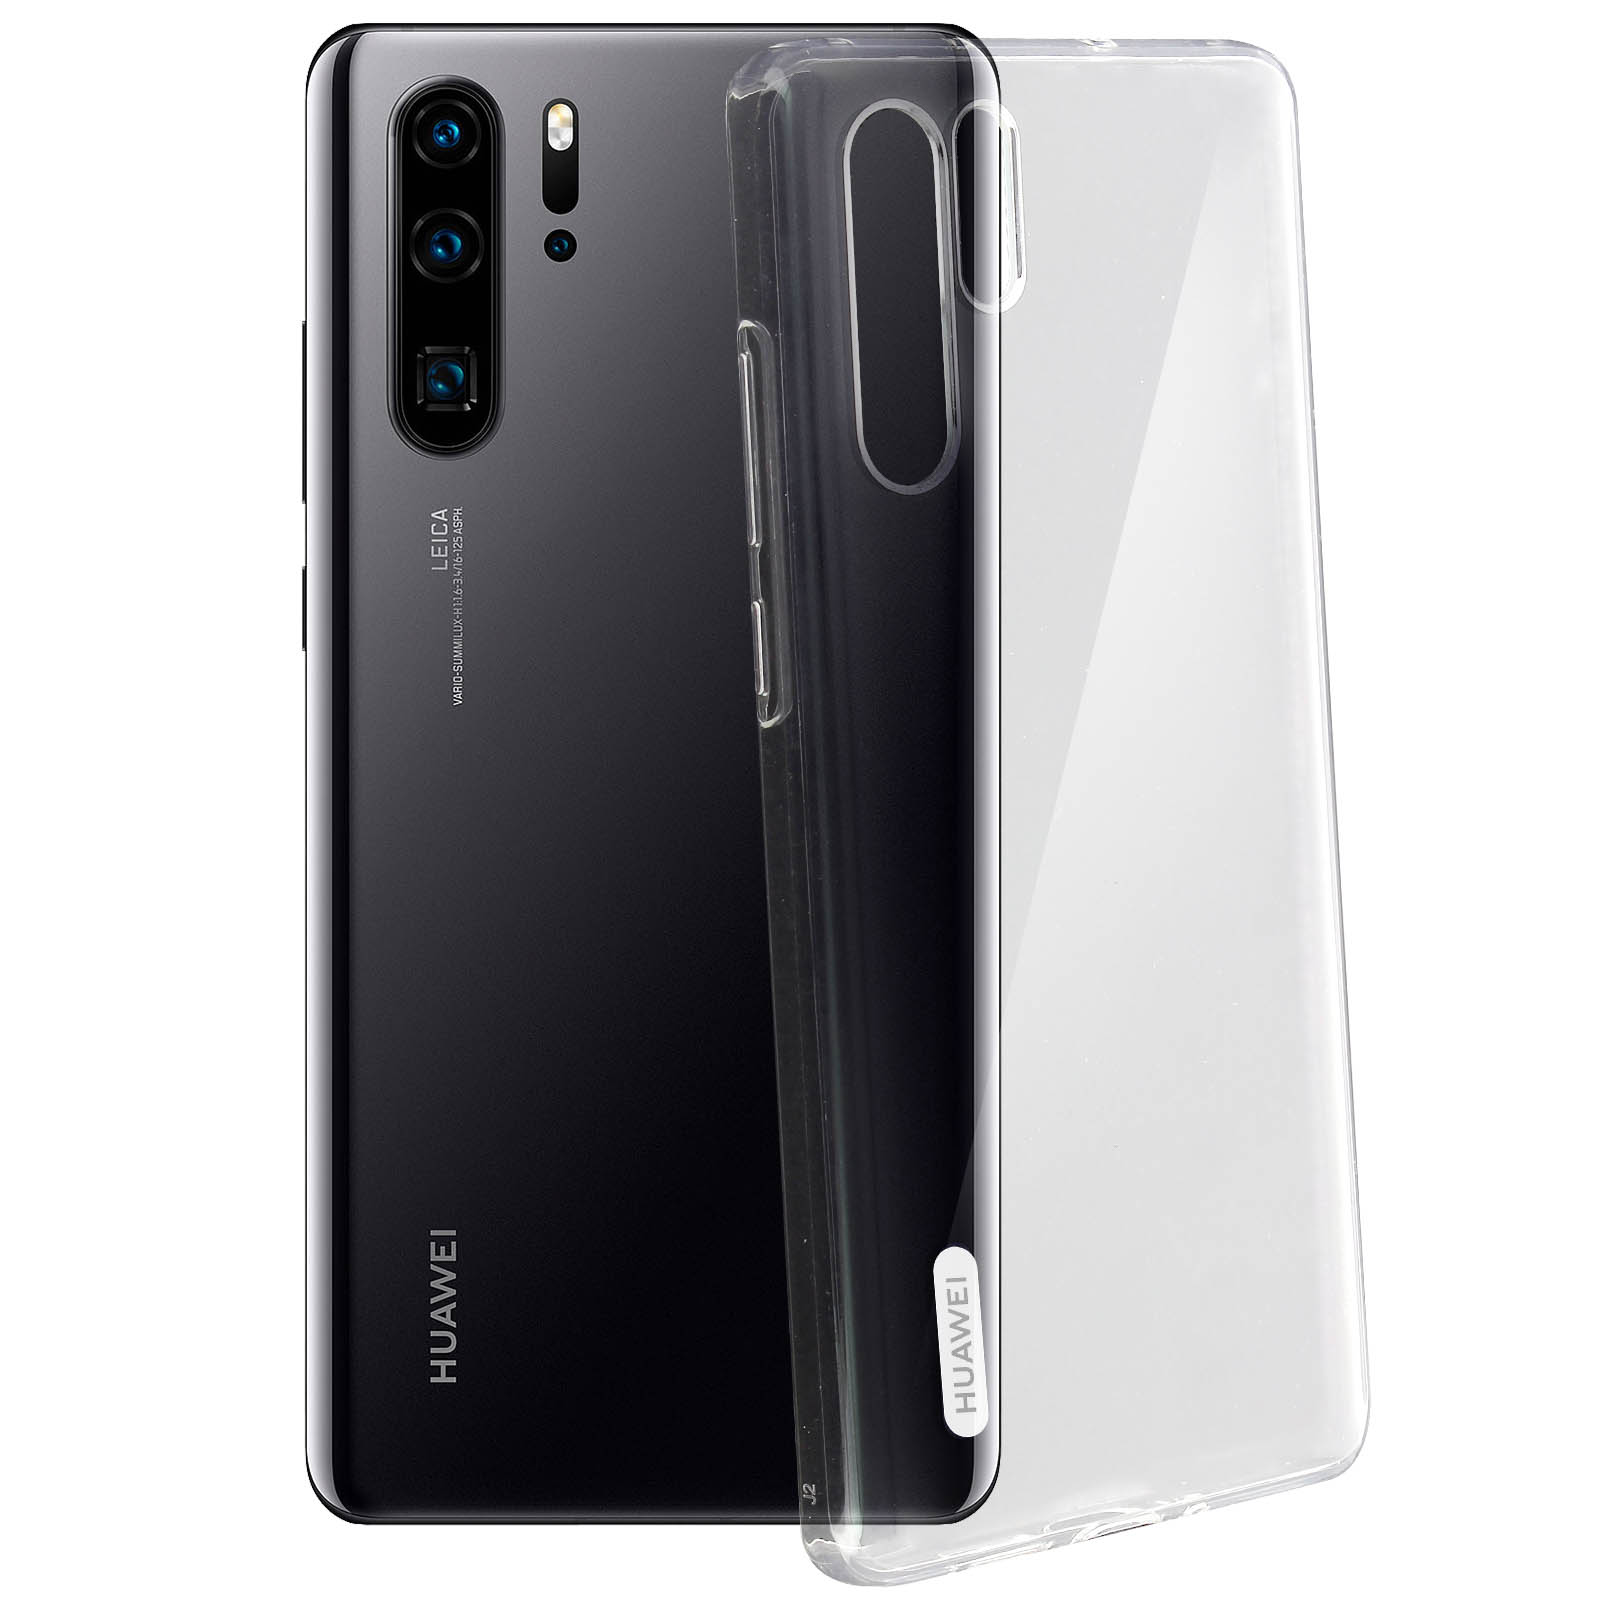 190226 Pro, P30 CO CASE P30 Huawei, Transparent TR, CLEAR Backcover, HUAWEI PRO HUA